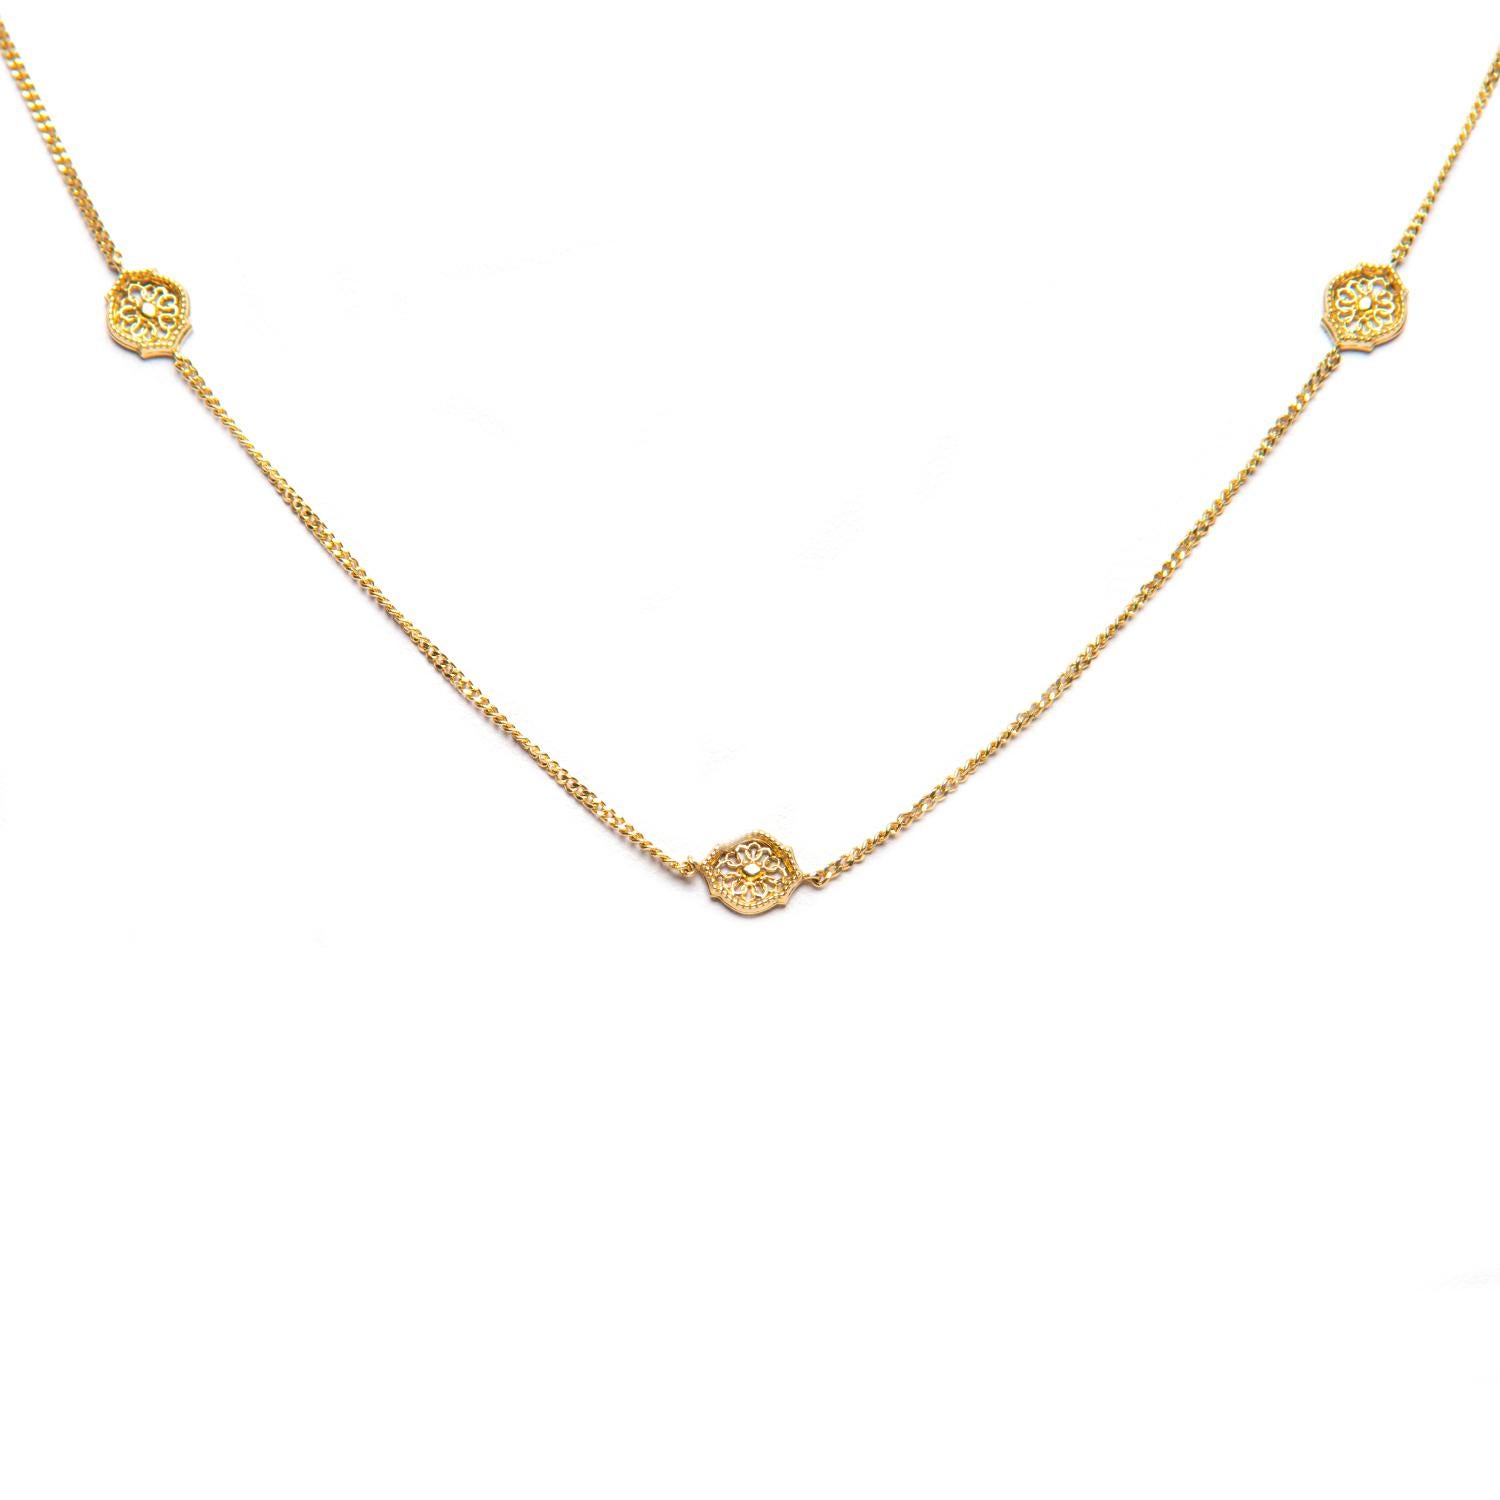 The ‘Mauresque’ Necklace by Natalie Barney features small Arabesque shape settings in a fine trace chain. It is a classical piece and comes with the matching stud earrings. Can be worn at both 42cm and 45cm.

Made in 18 karat yellow gold. 

Inspired